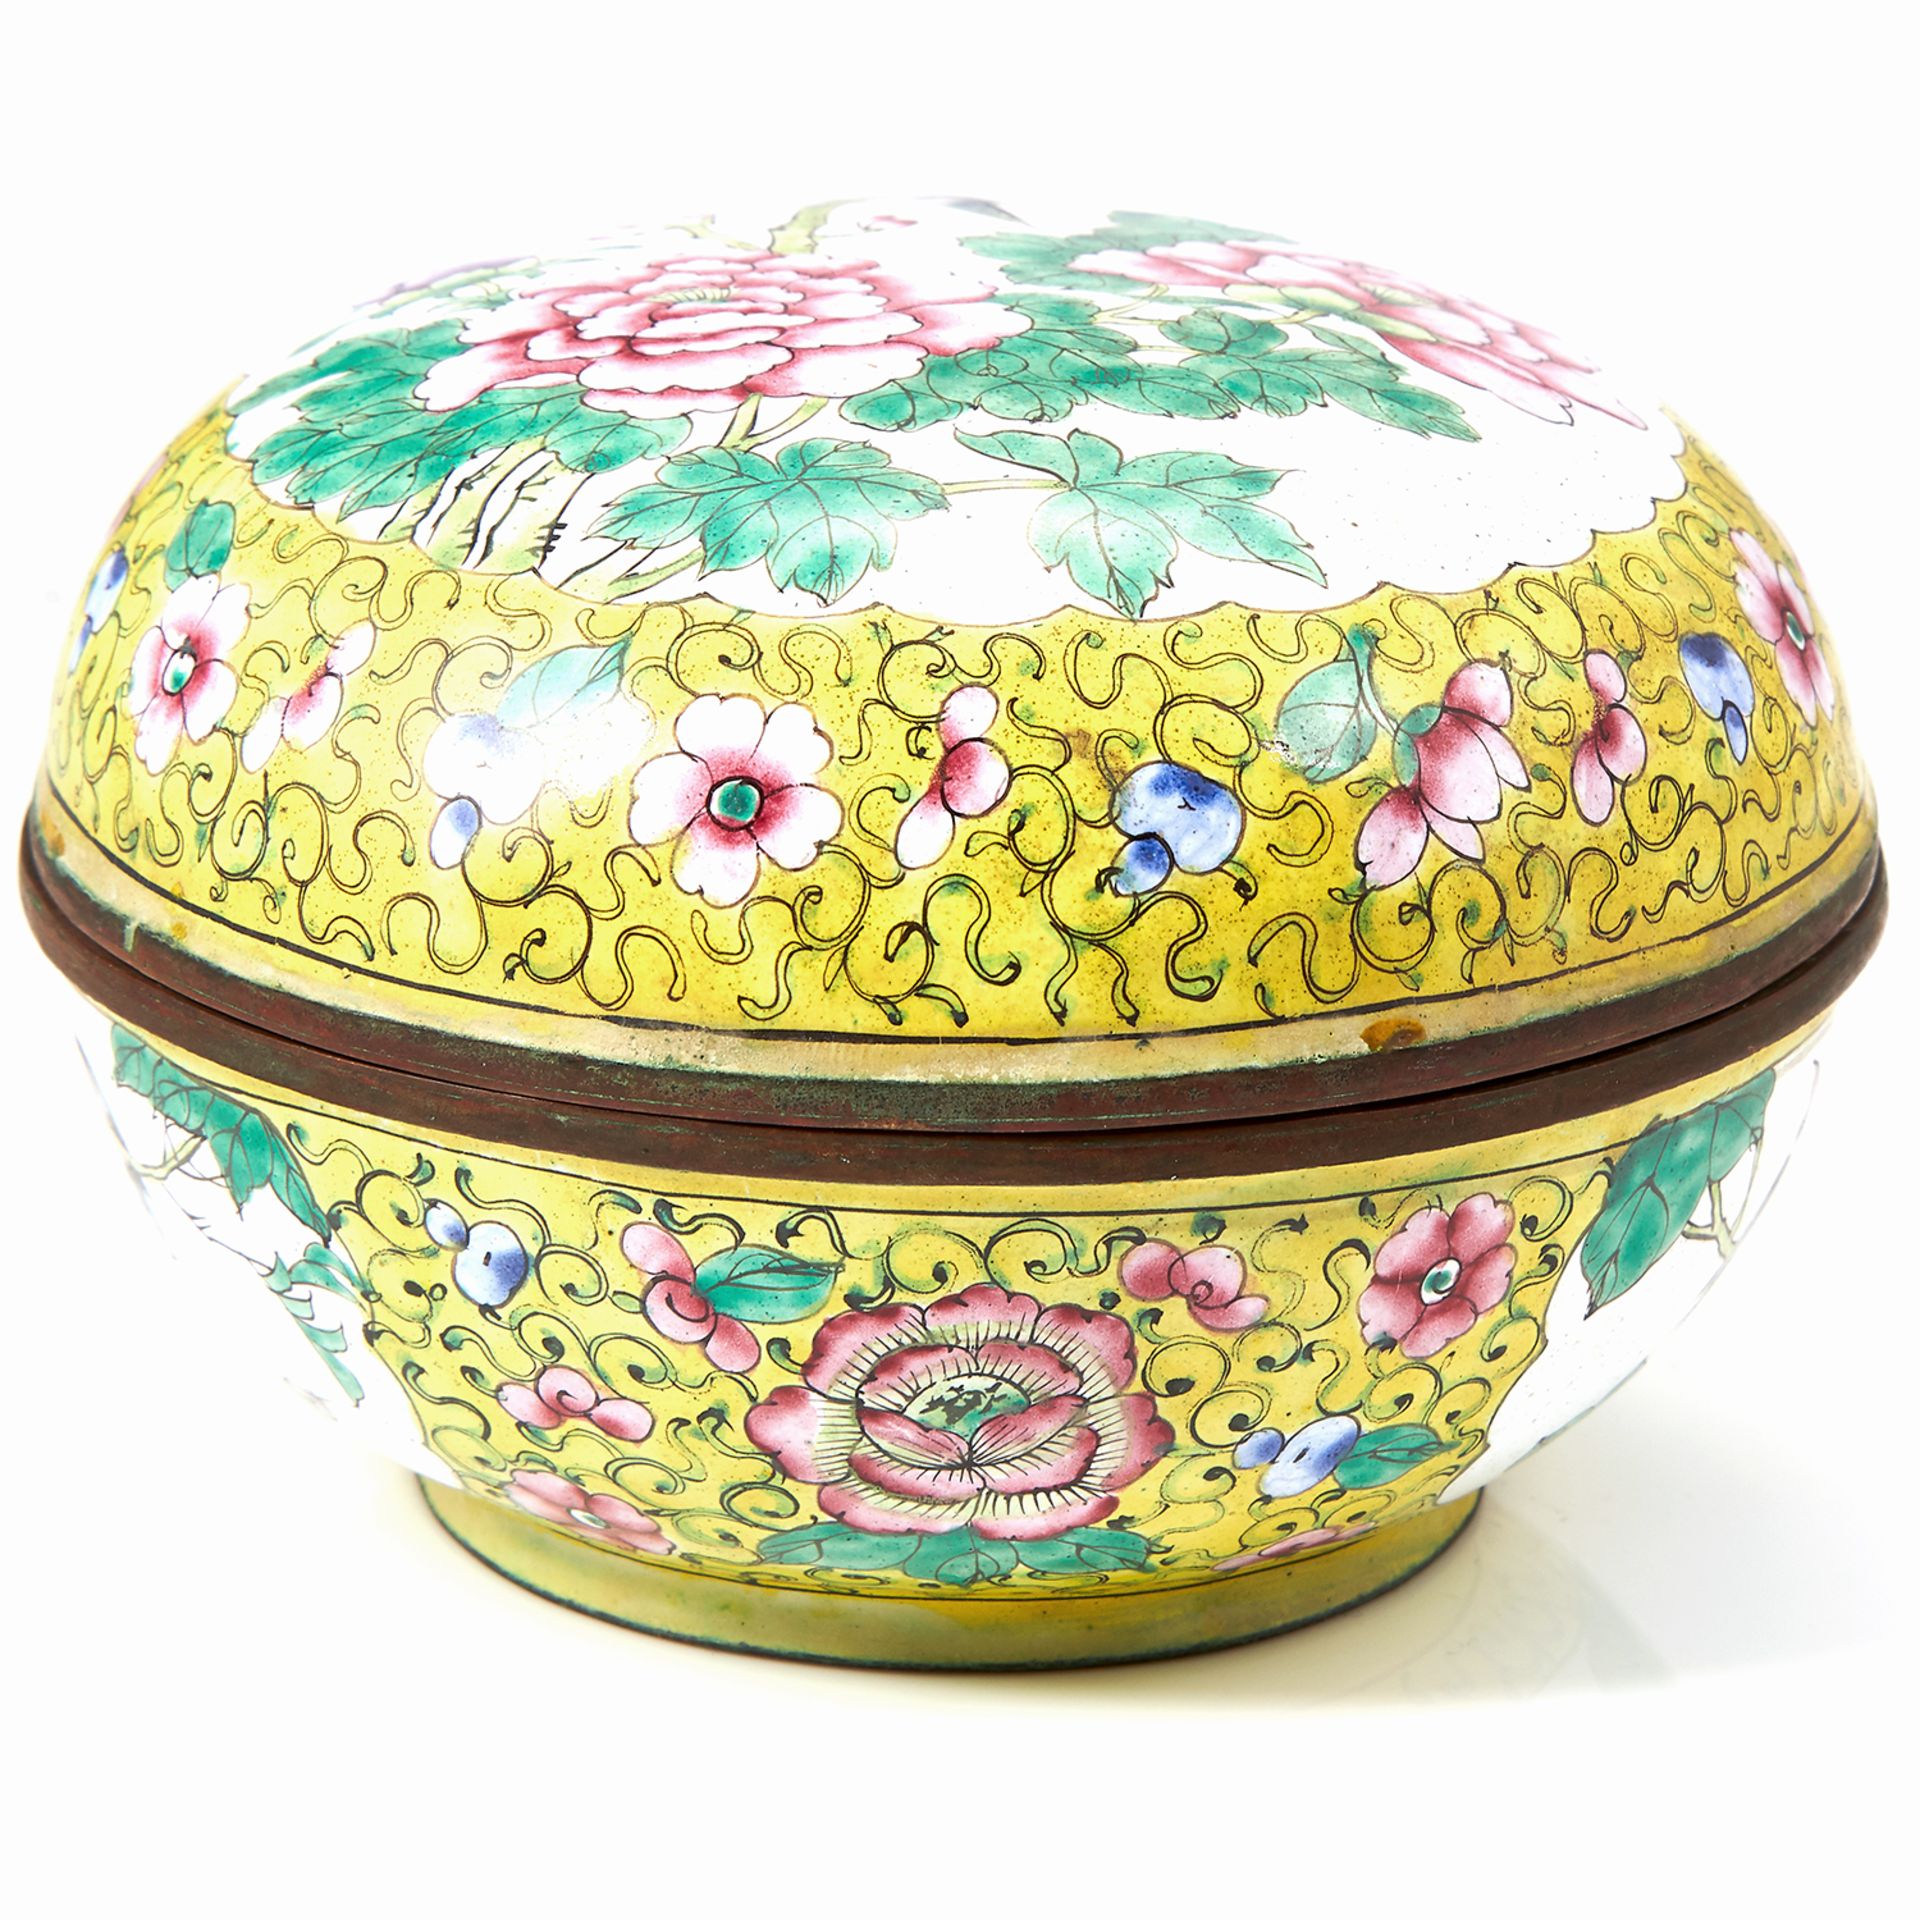 A CHINESE CLOISONNE ENAMEL BRONZE BOX of circular form, decorated in enamel with pink peonies